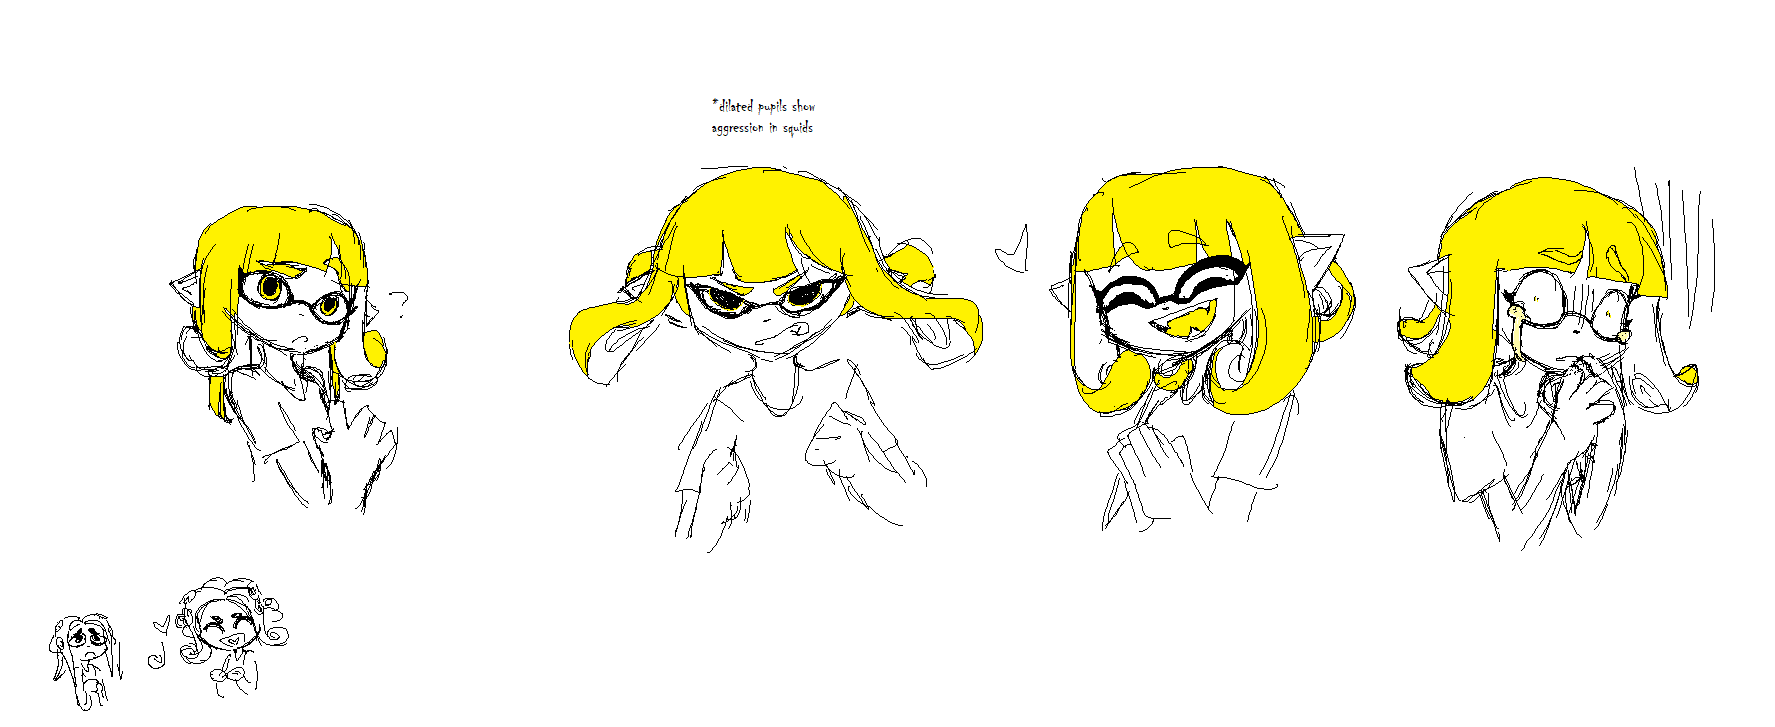 idea of inkling tentacles moving with different expressions